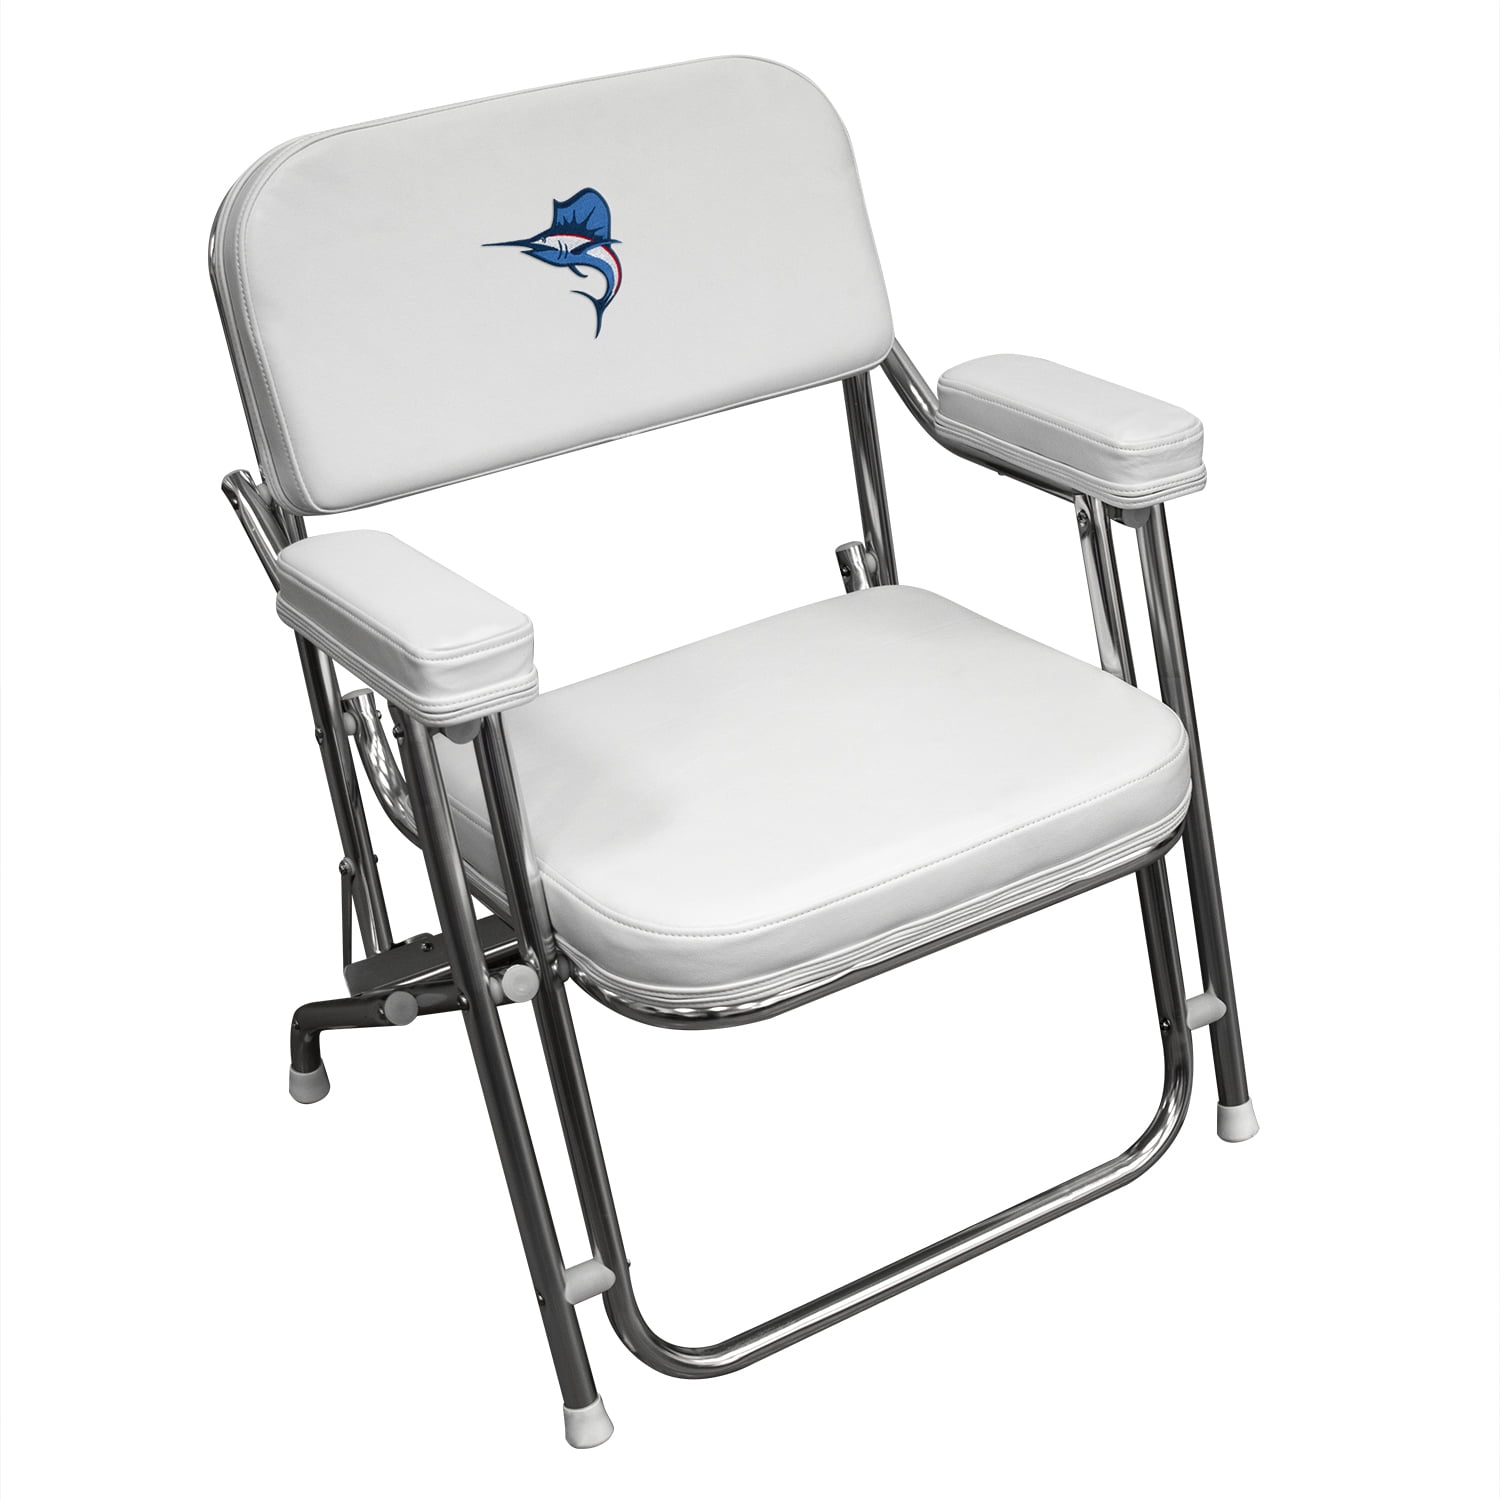 Wise 3319-7841 Boaters Value Folding Deck Chair, White with Embroidered  Sportfish Logo